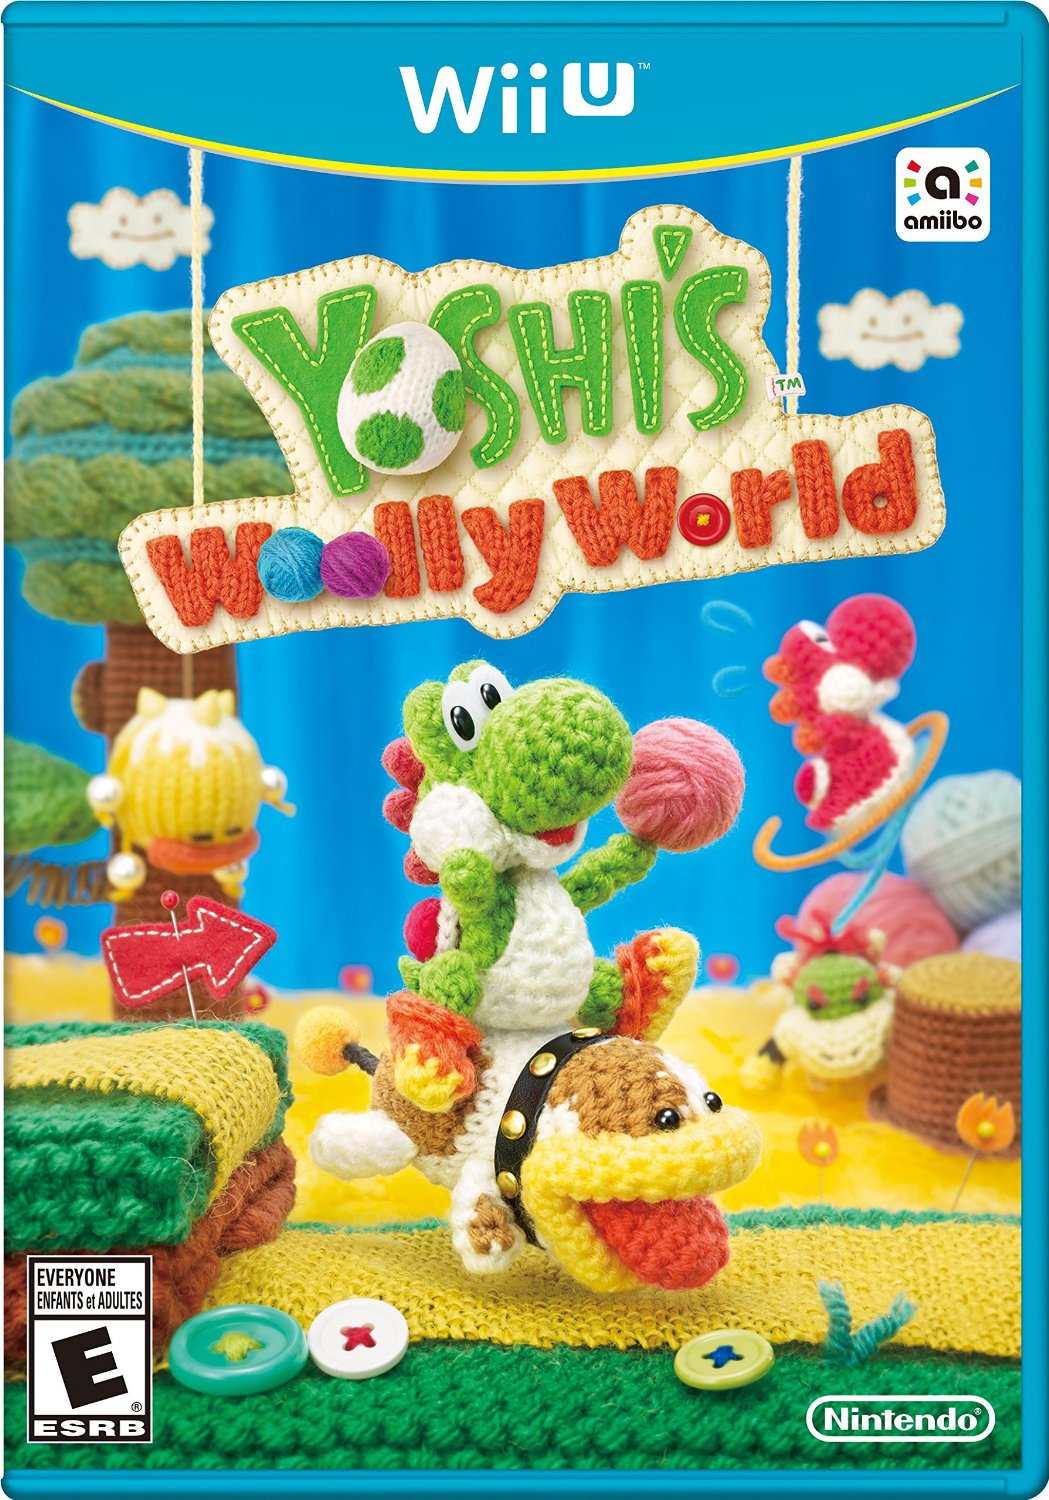 Yoshi’s Woolly World & Mario Party 10 (For Wii U) Only $29.99 Each!